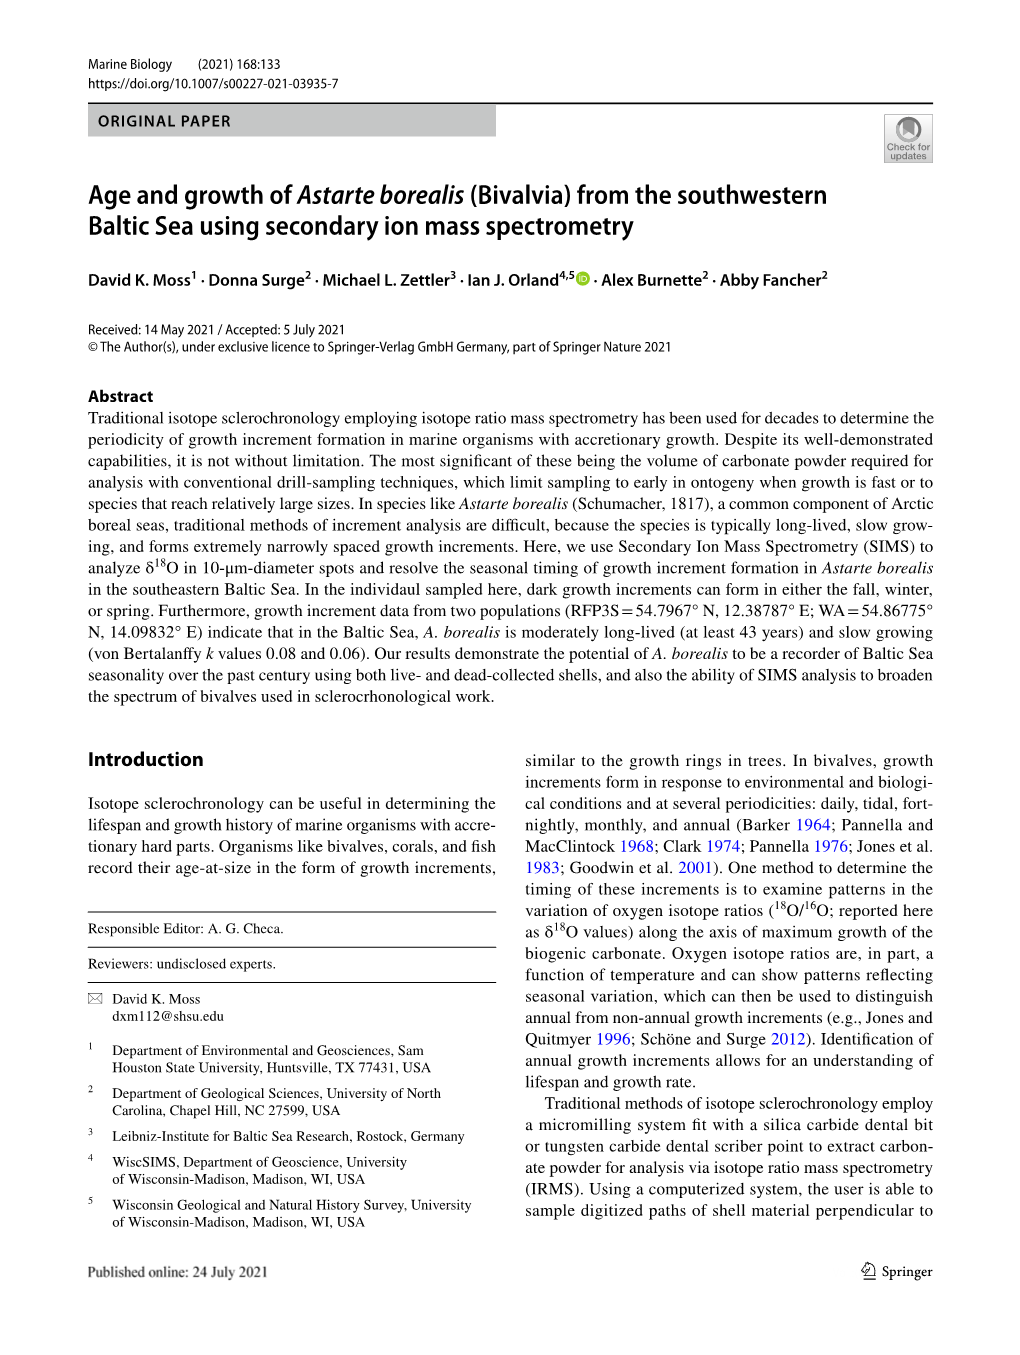 Age and Growth of Astarte Borealis (Bivalvia) from the Southwestern Baltic Sea Using Secondary Ion Mass Spectrometry